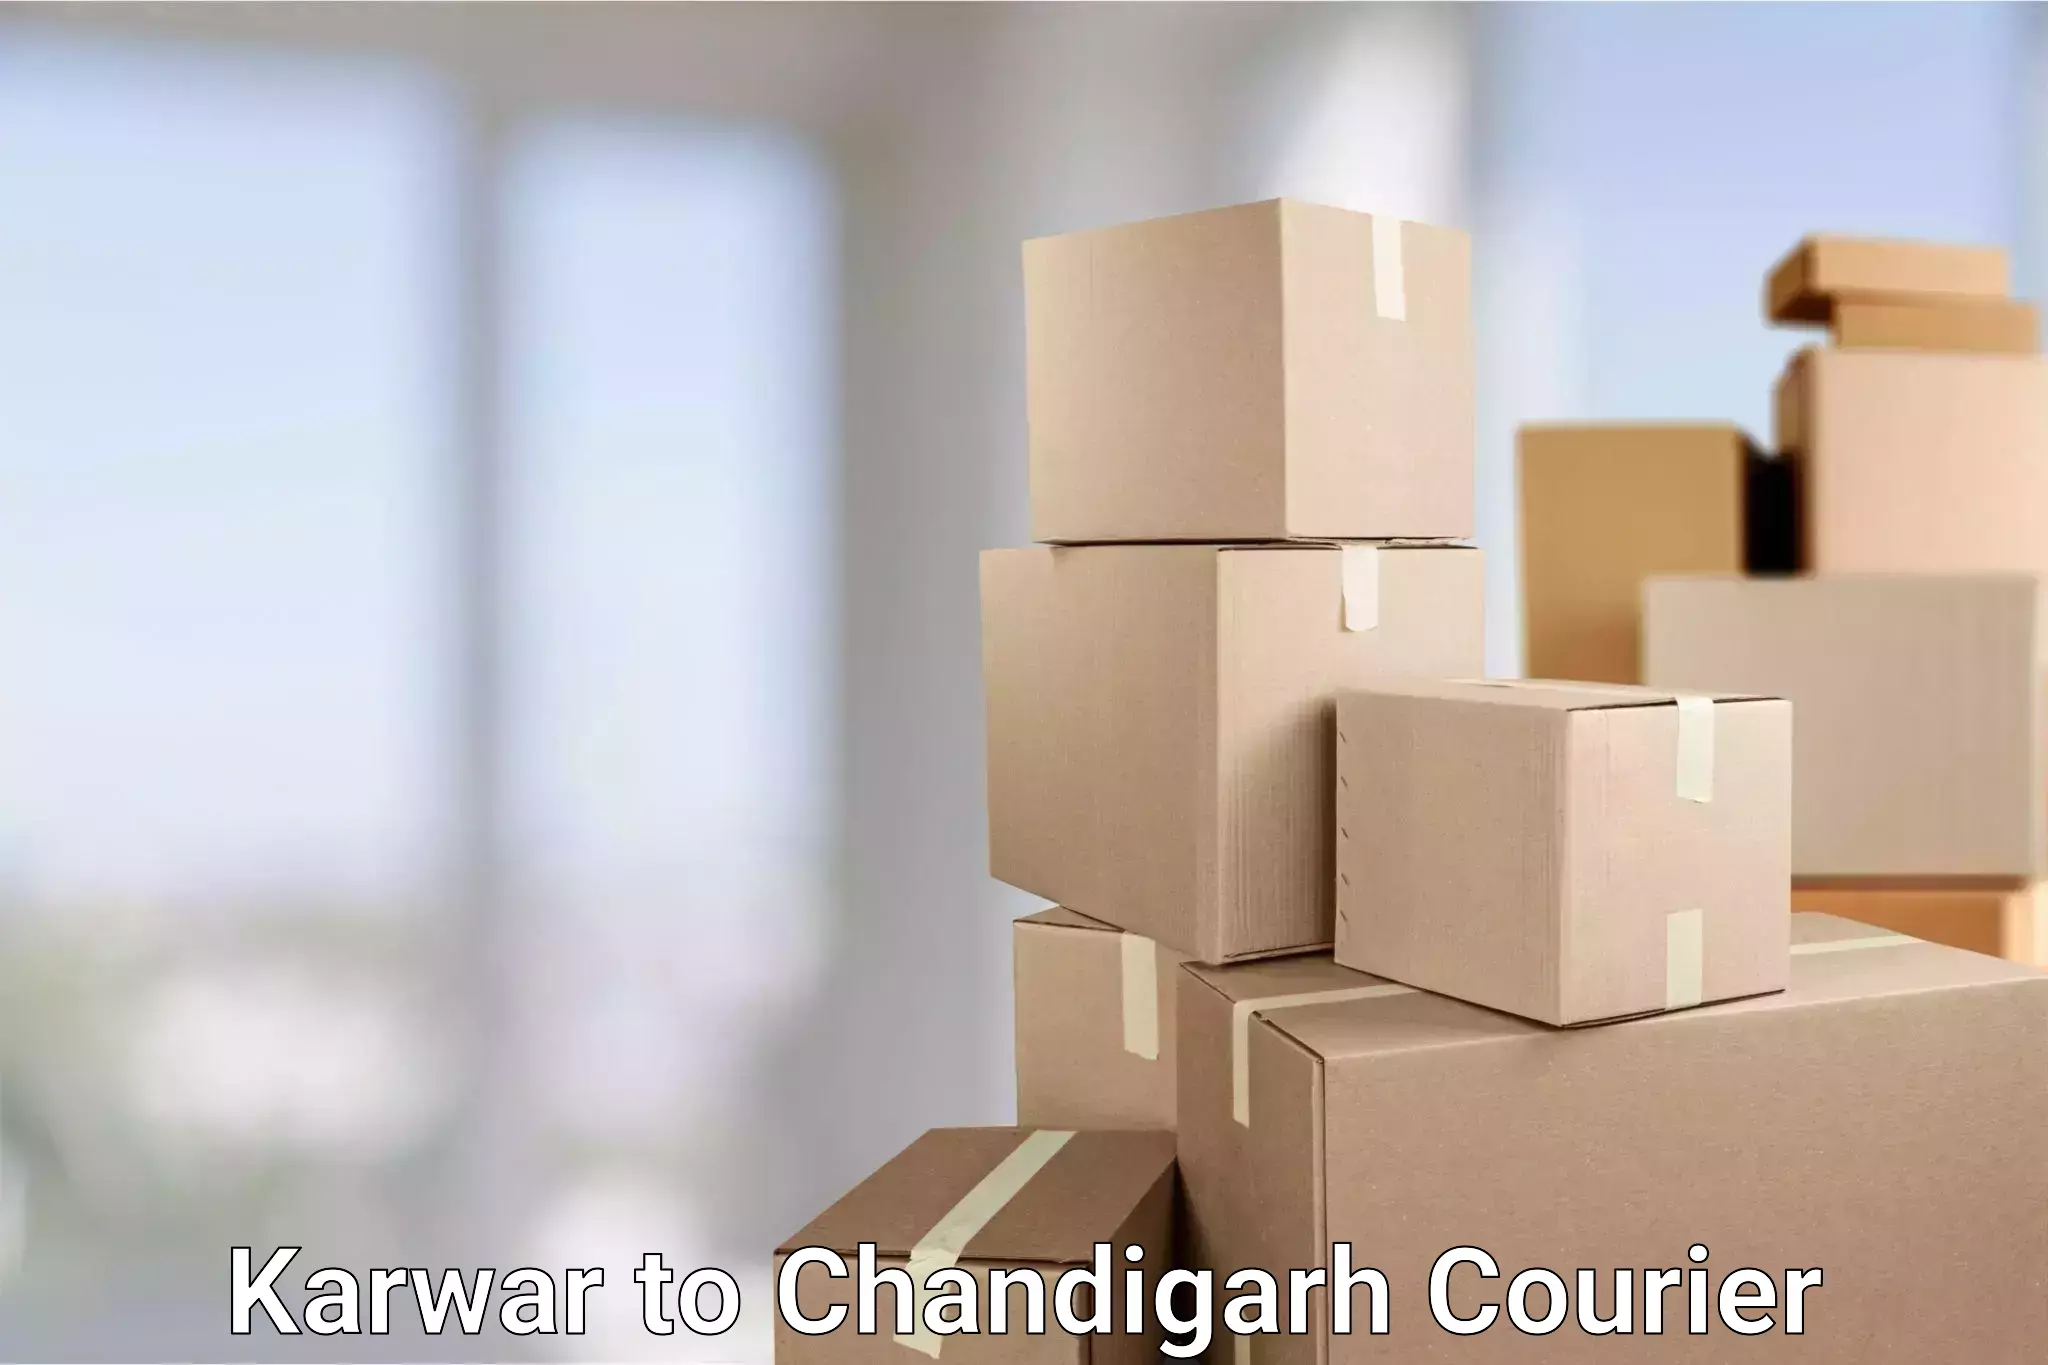 End-to-end delivery Karwar to Chandigarh